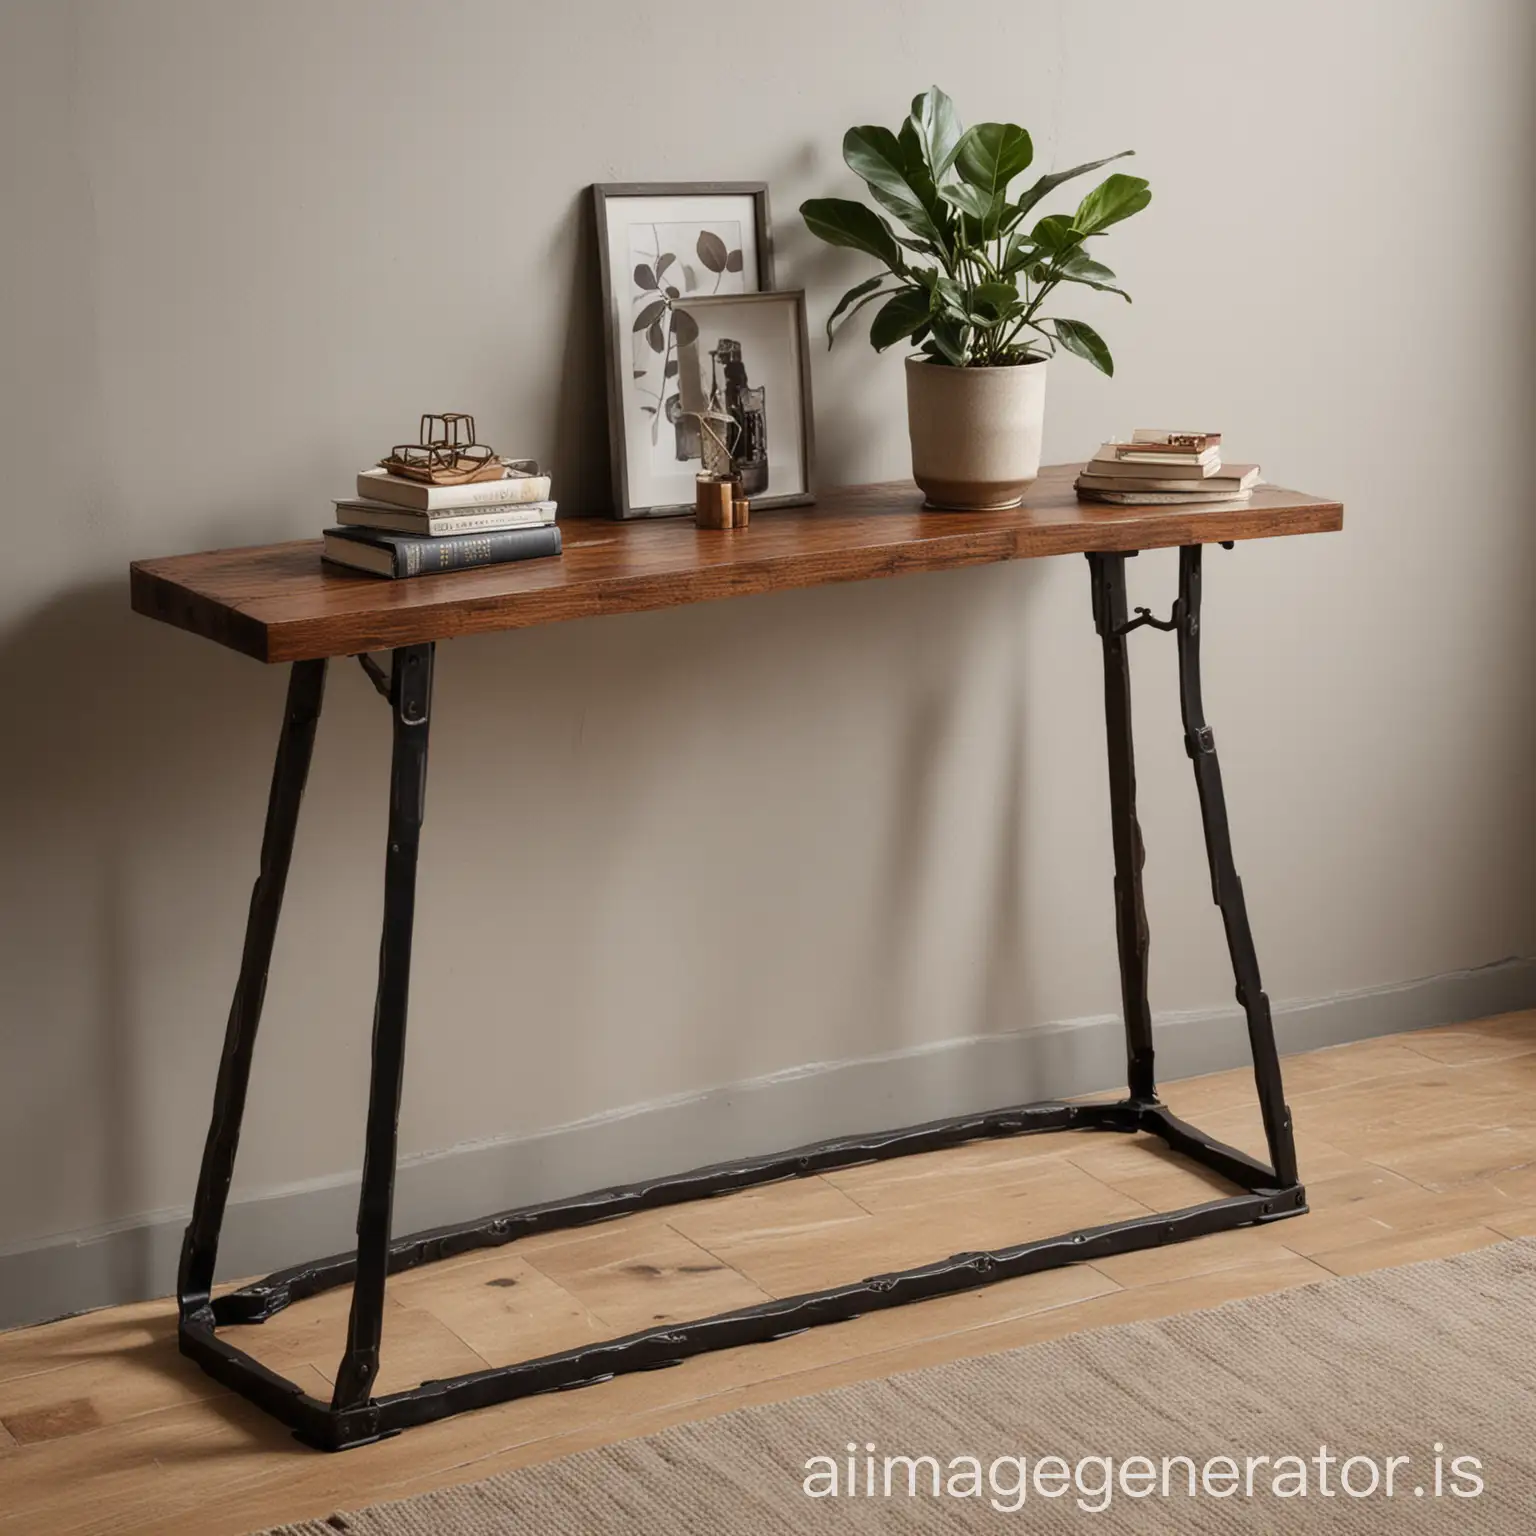 Design  an industrial aesthetic Console table inspired from coffee bean